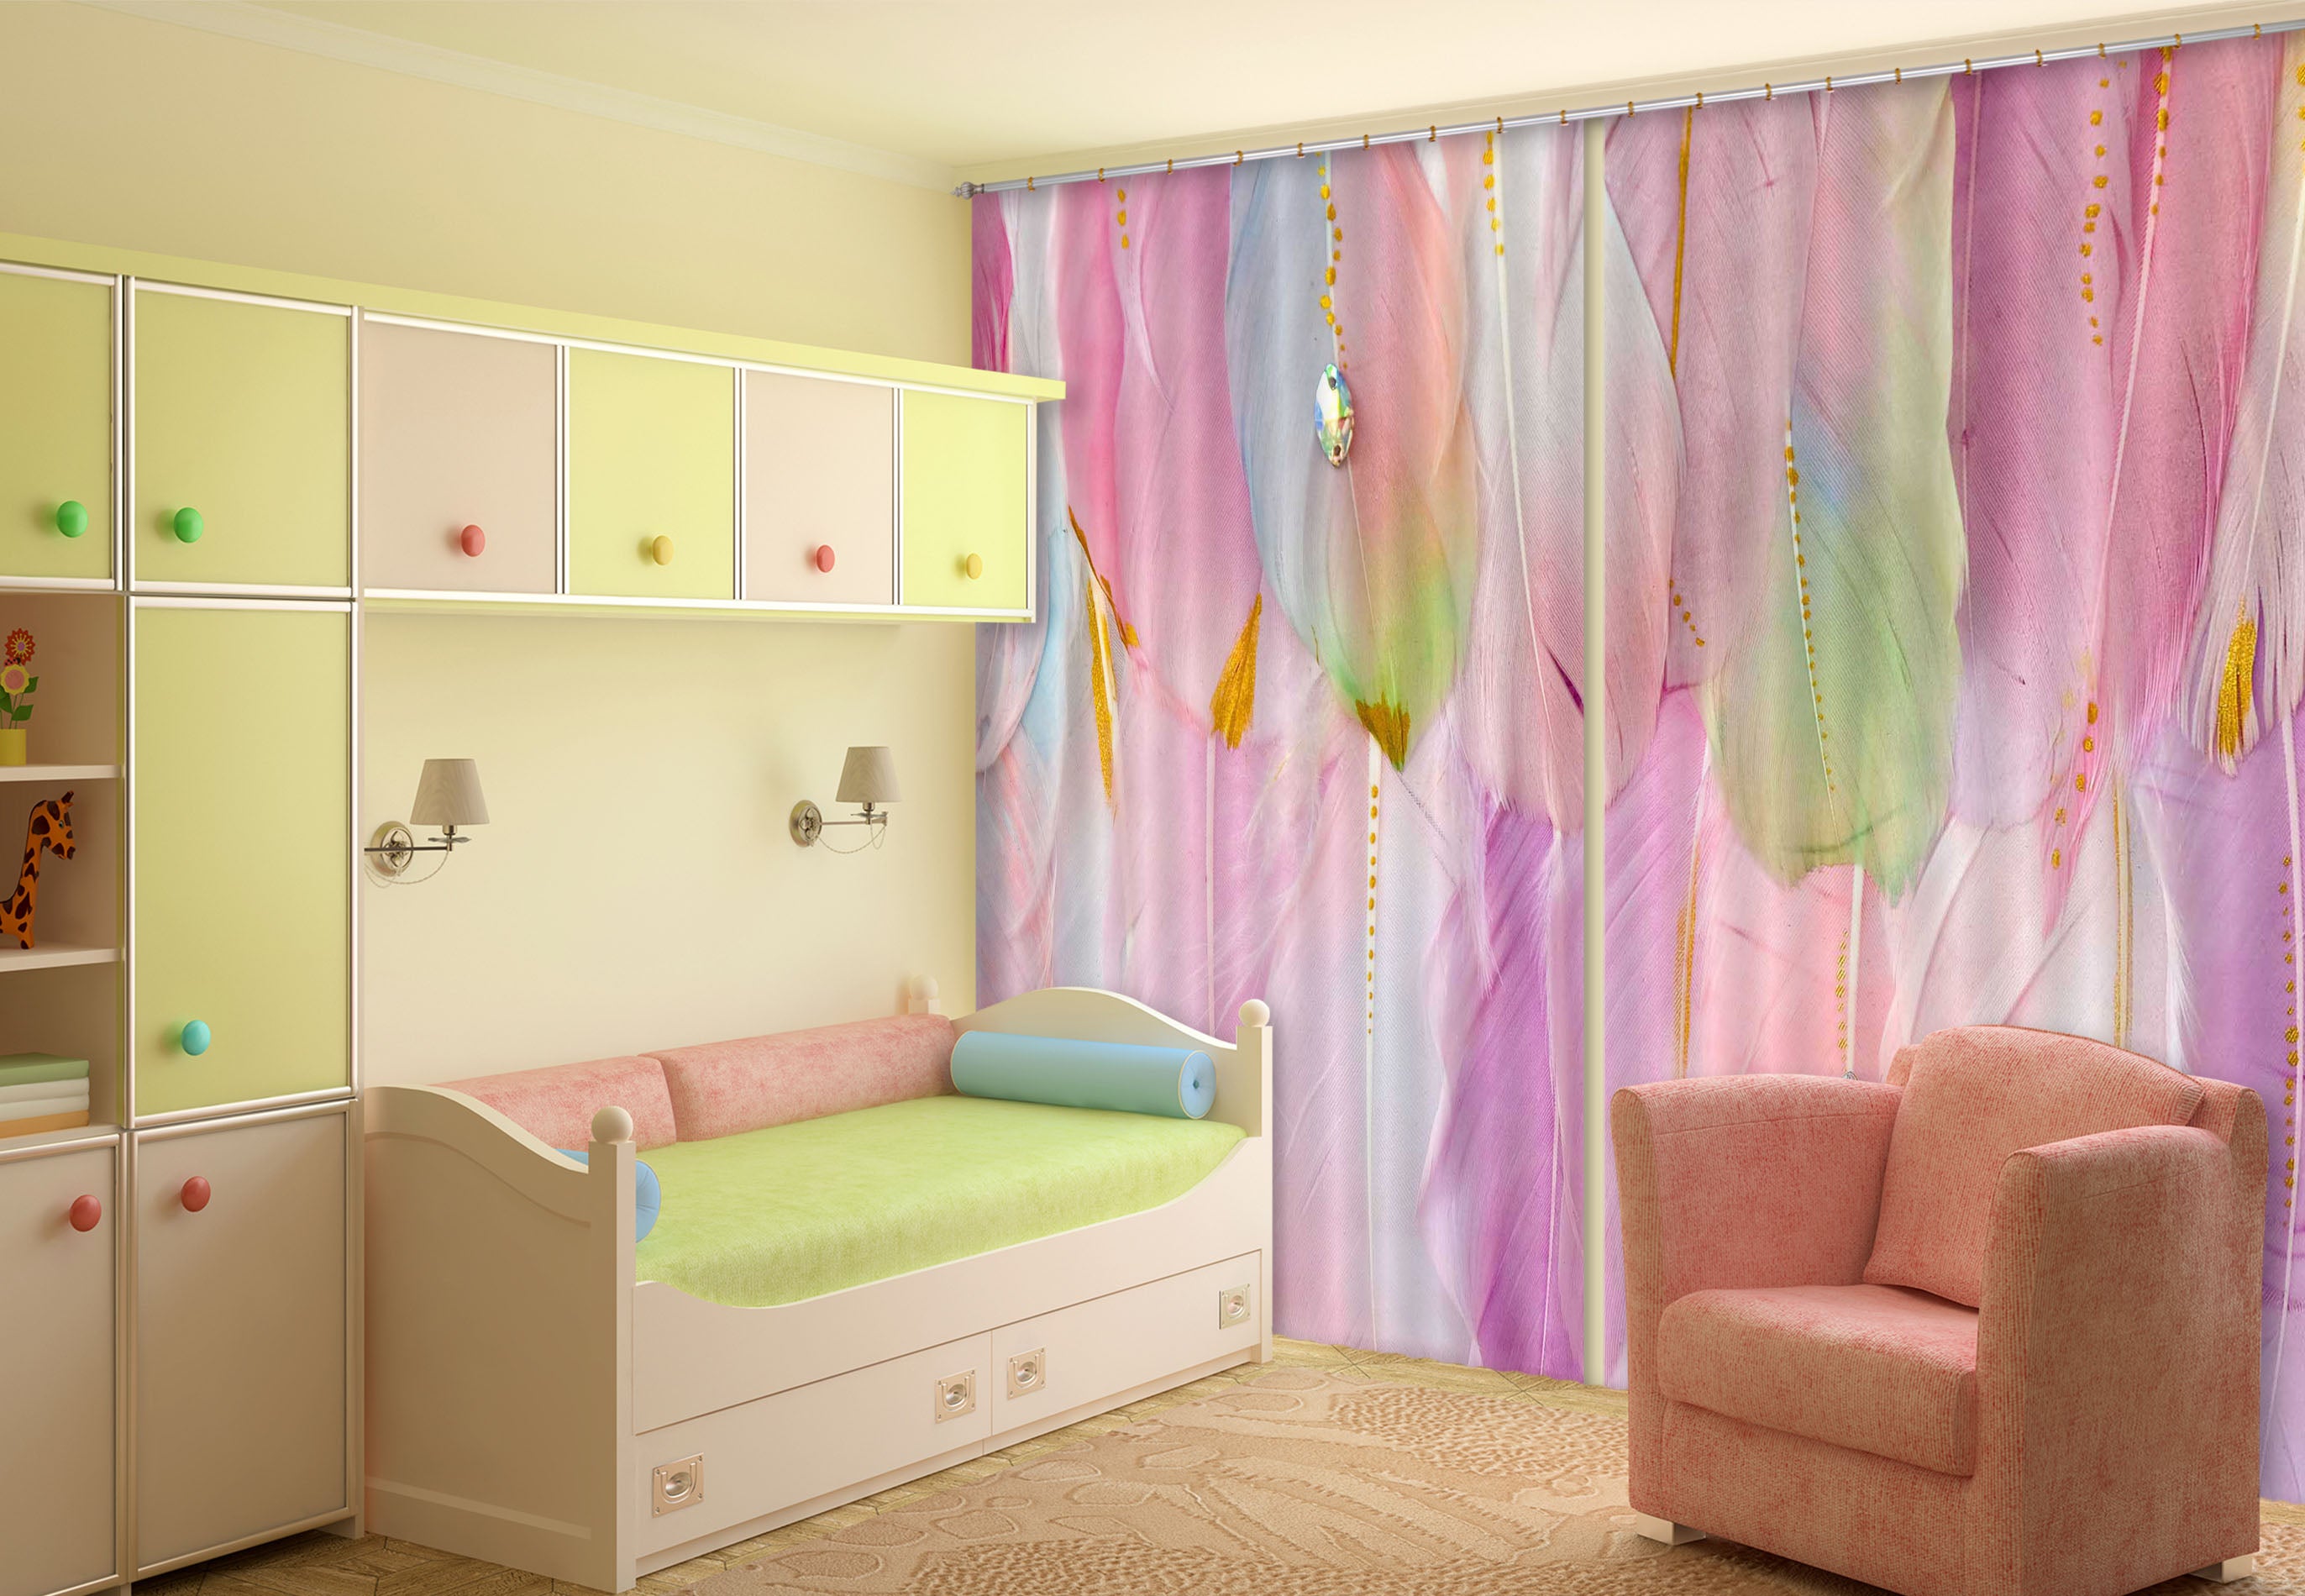 3D Pink Feather 122 Curtains Drapes